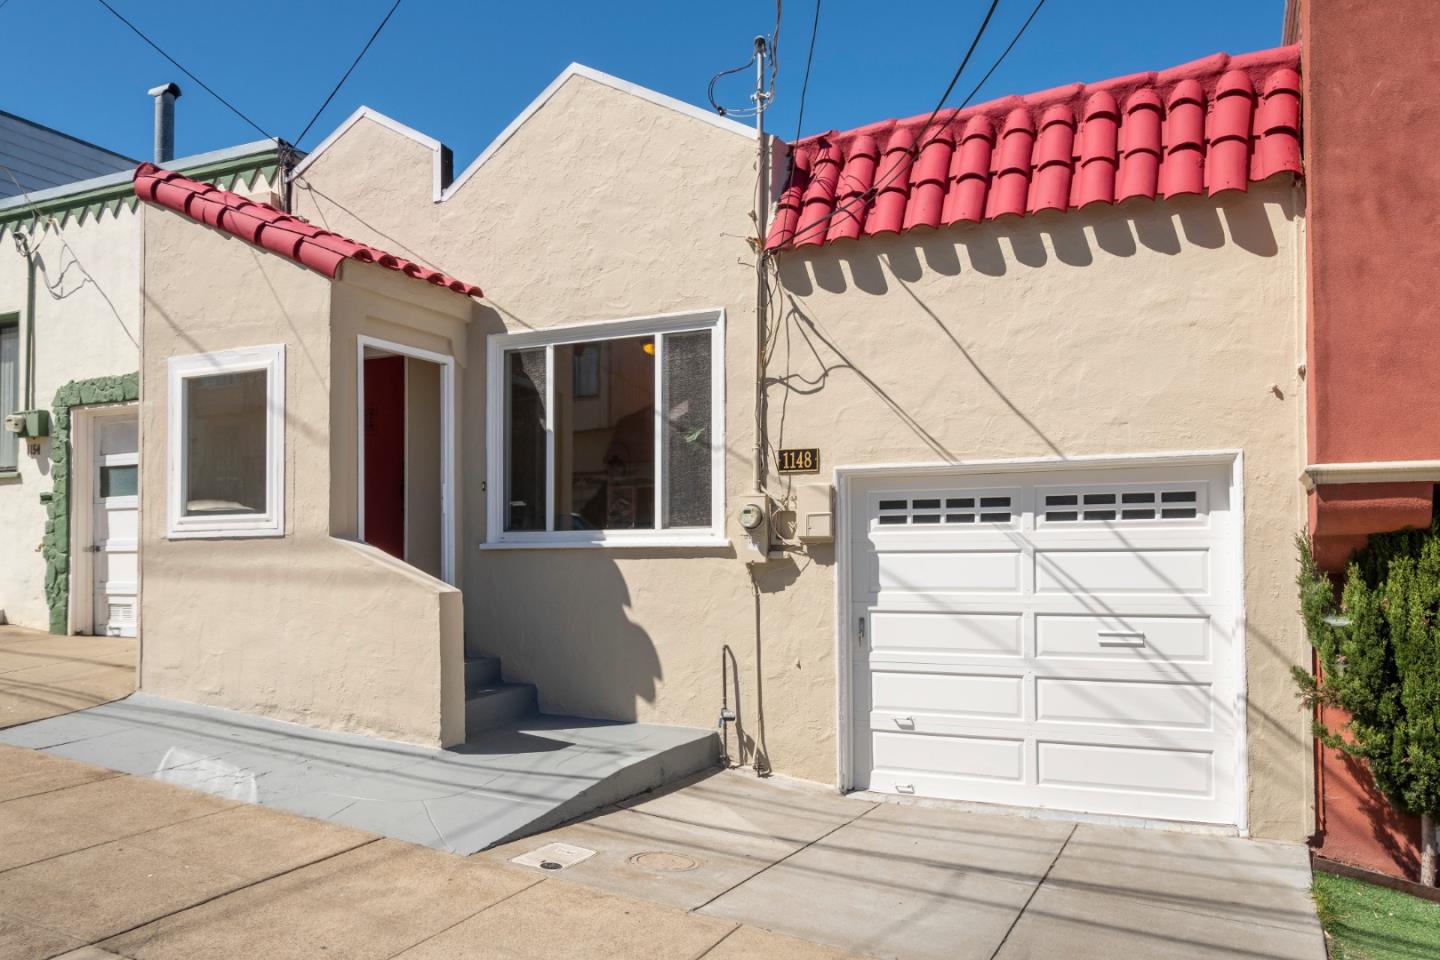 1148 Hanover Street Daly City Ca 94014 Better Homes And